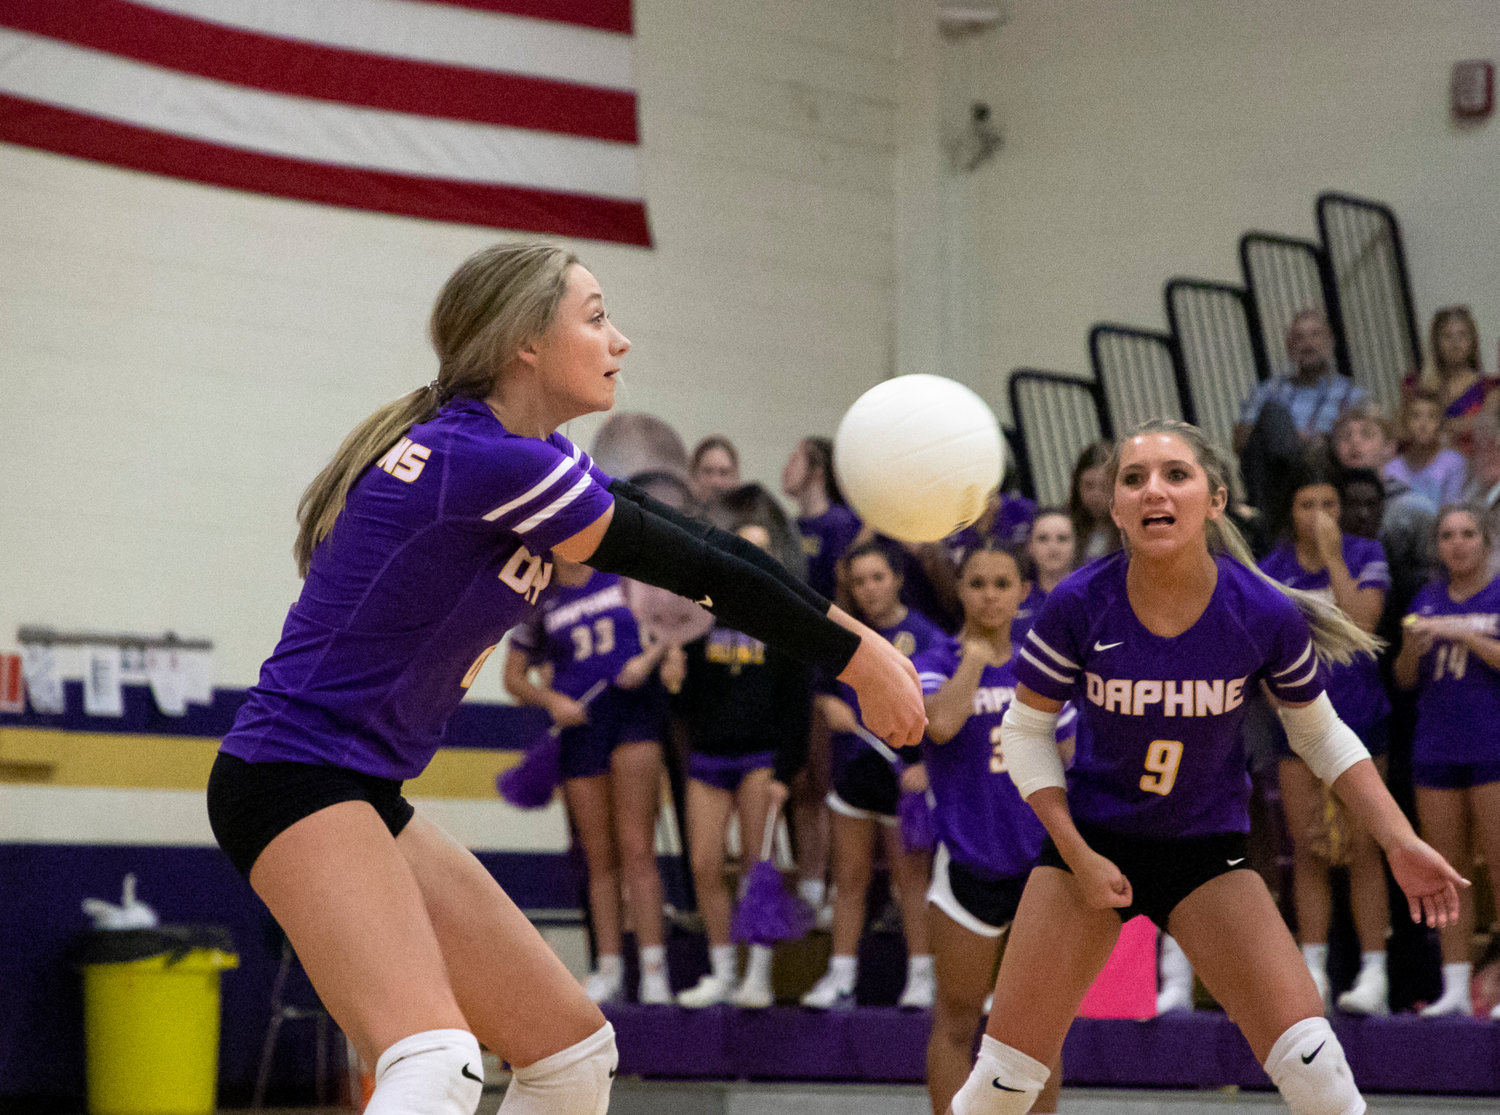 Daphne freshman Ella Lomax receives a serve during the Trojans’ area match against the McGill-Toolen Yellow Jackets at home Sept. 20. Lomax was one of three all-state representatives from Daphne on AHSVCA teams.